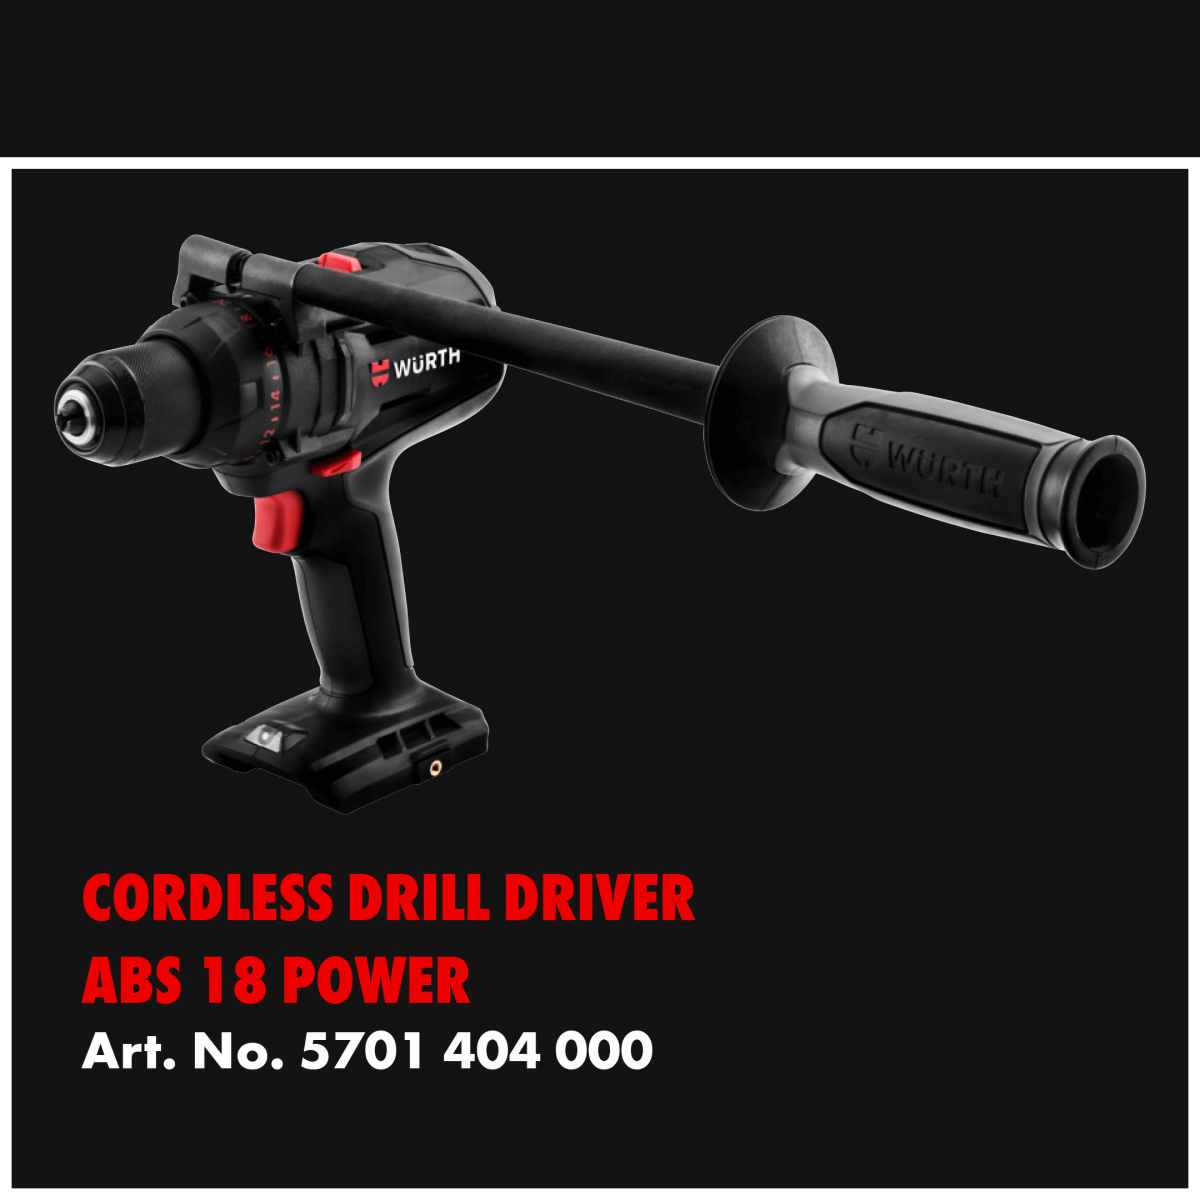 Cordless Drill Driver ABS-18 Power